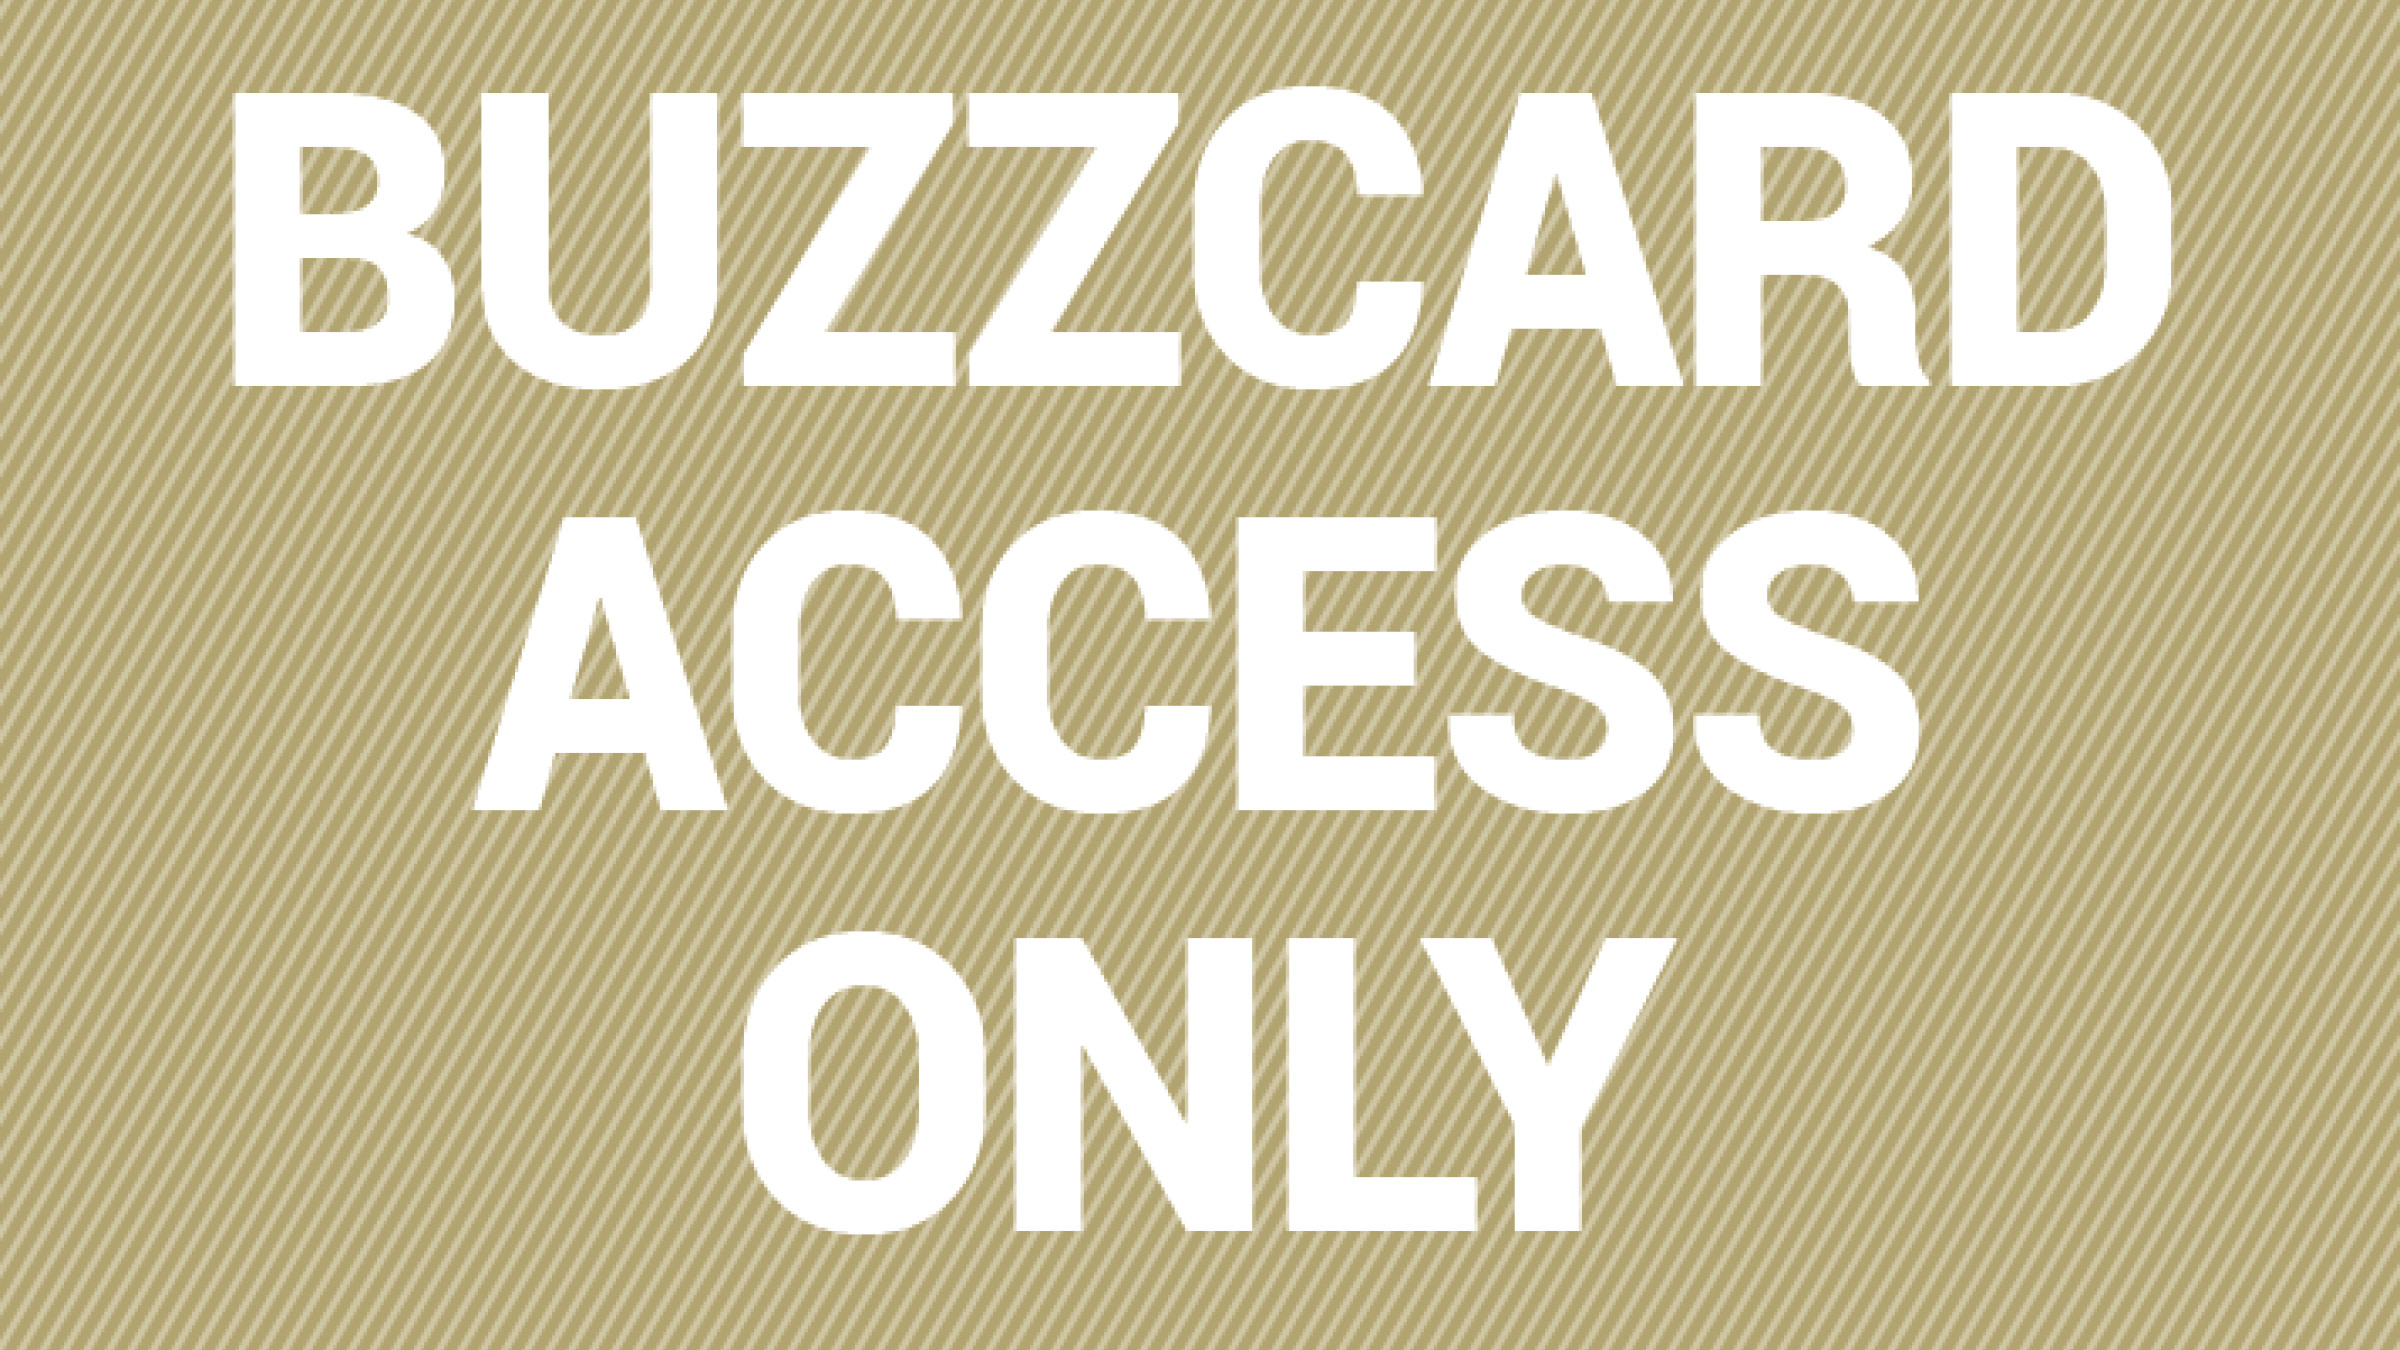 BuzzCard Access Only